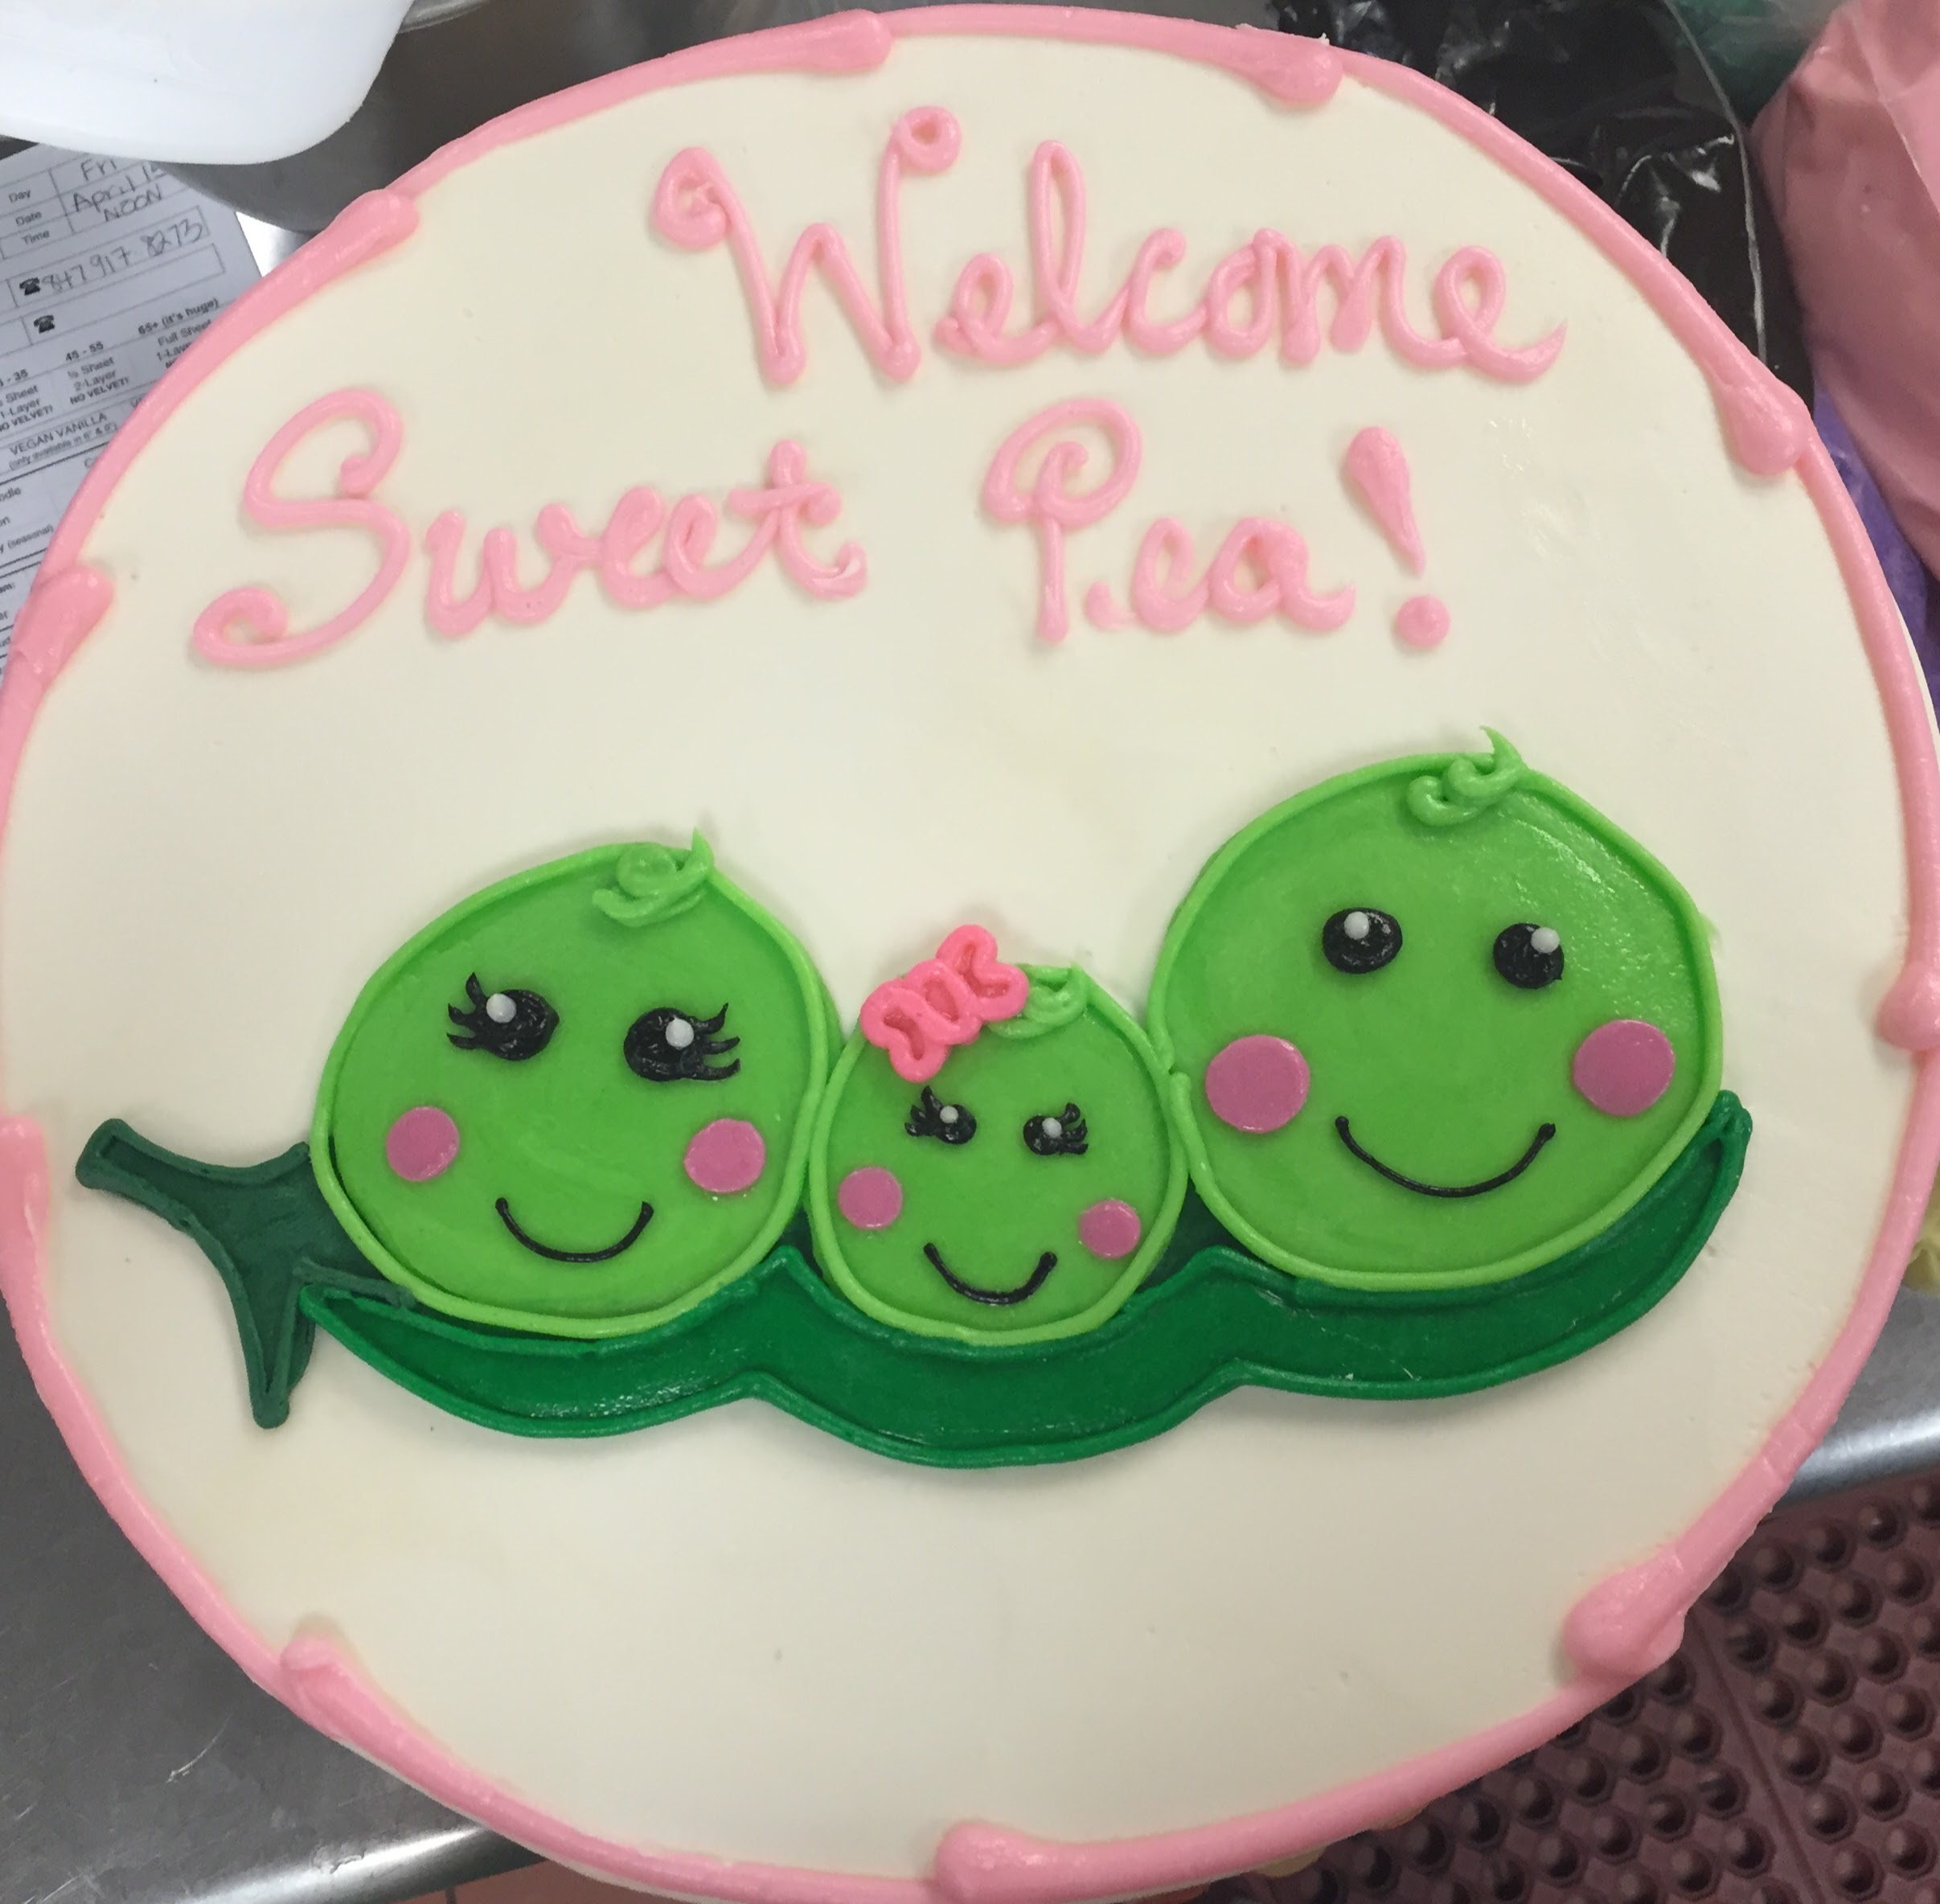 THREE SWEET PEAS IN A POD CUTE GIRL BABY SHOWER CAKE IN CHICAGO ILLINOIS